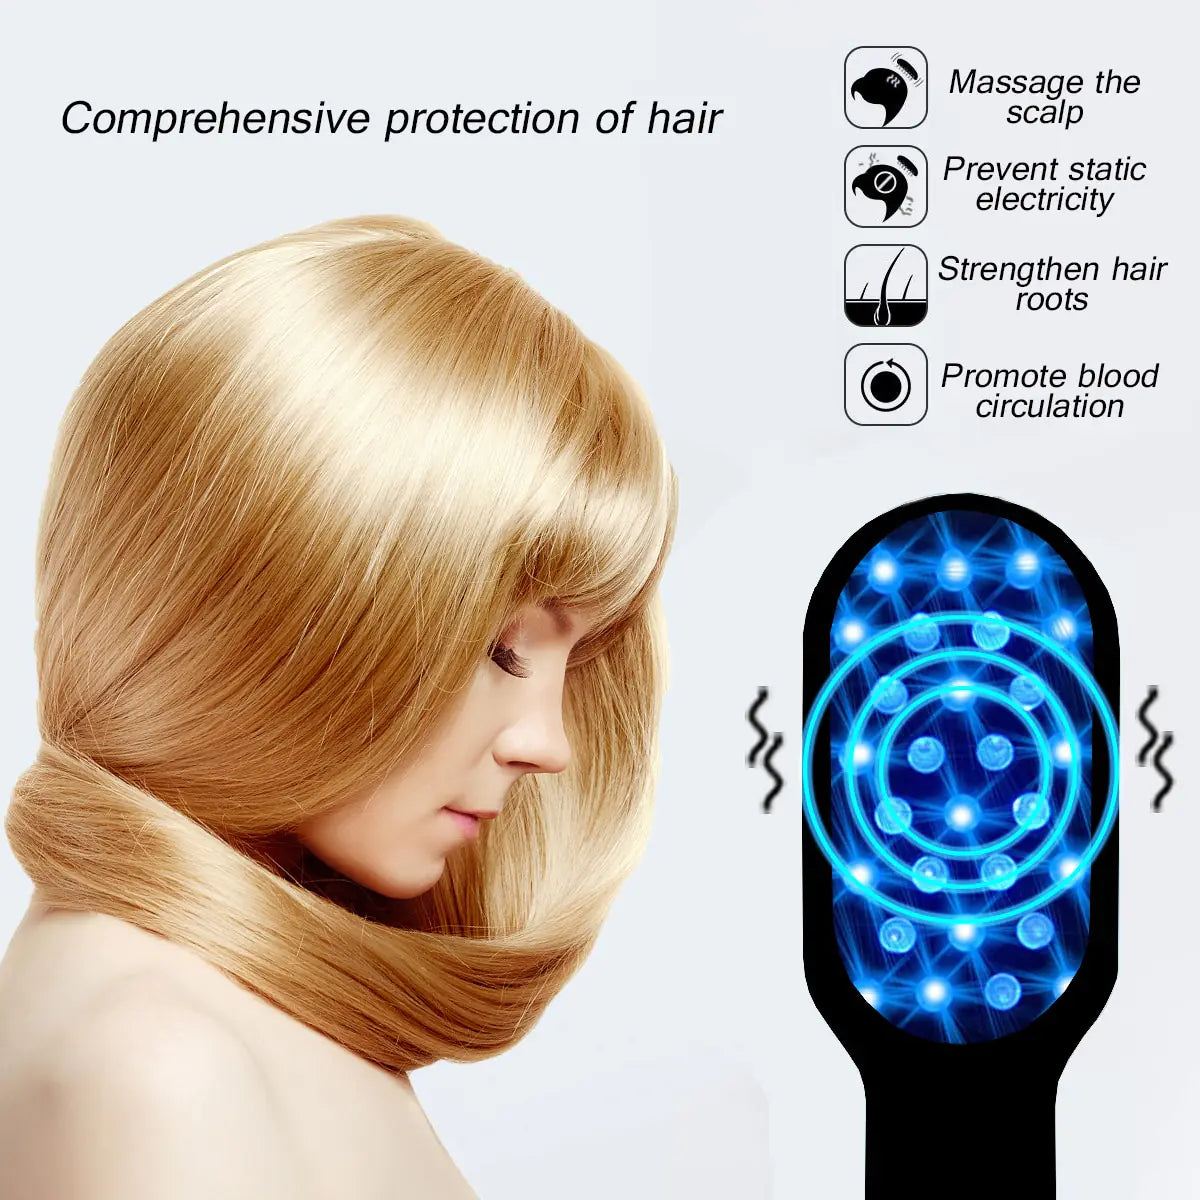 Electric Hair Growth Comb